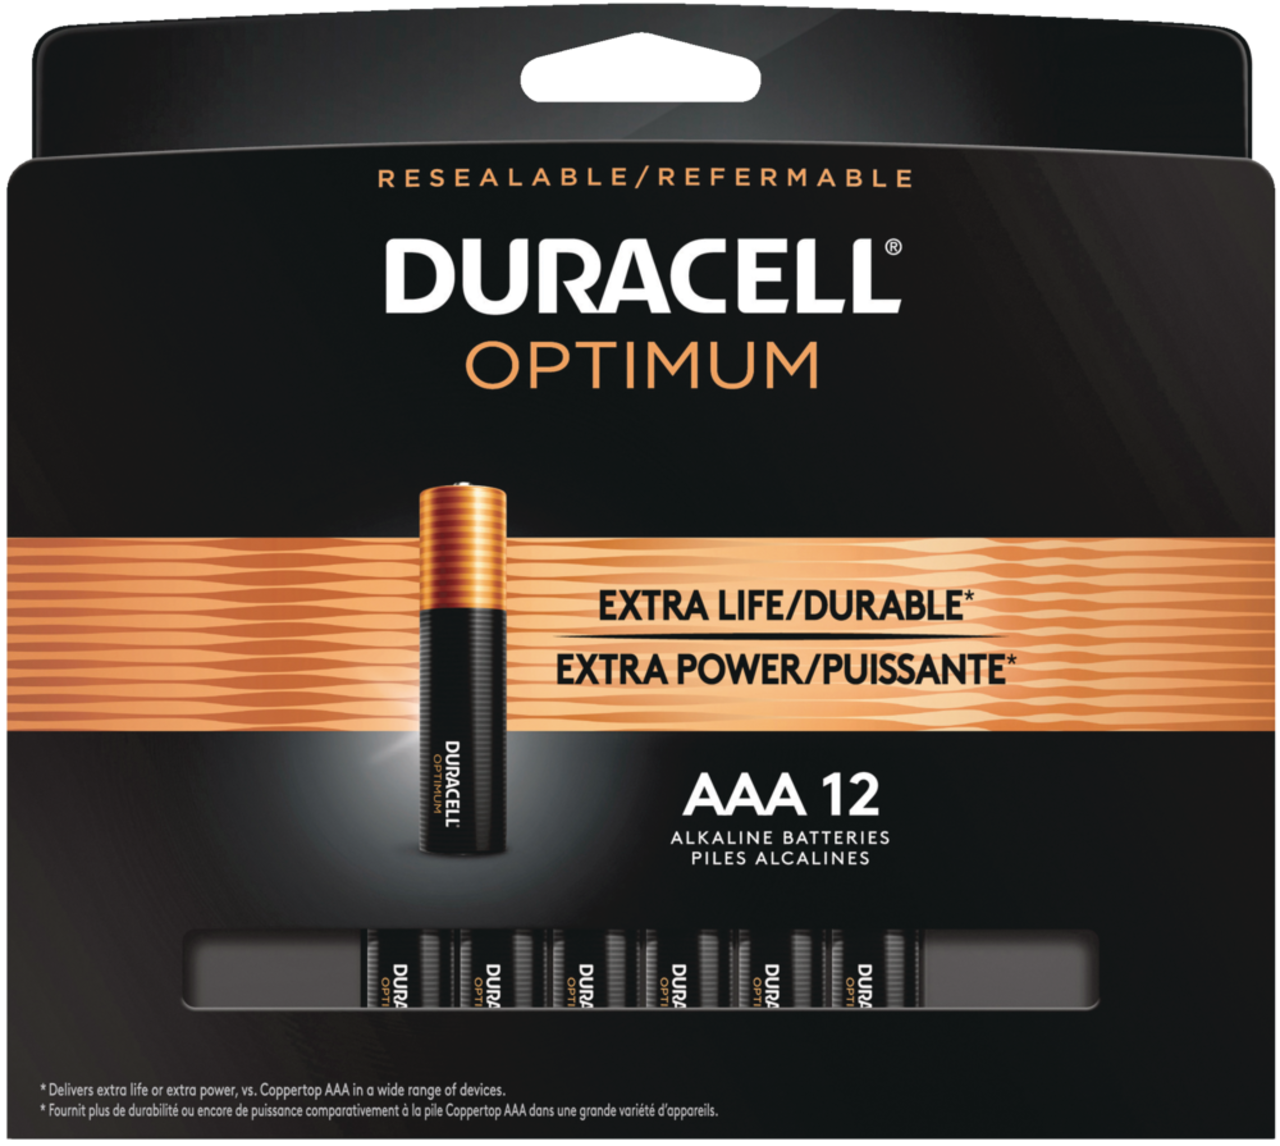 Duracell Optimum AAA Battery with 4X POWER BOOST™, 6 Pack Resealable  Package 